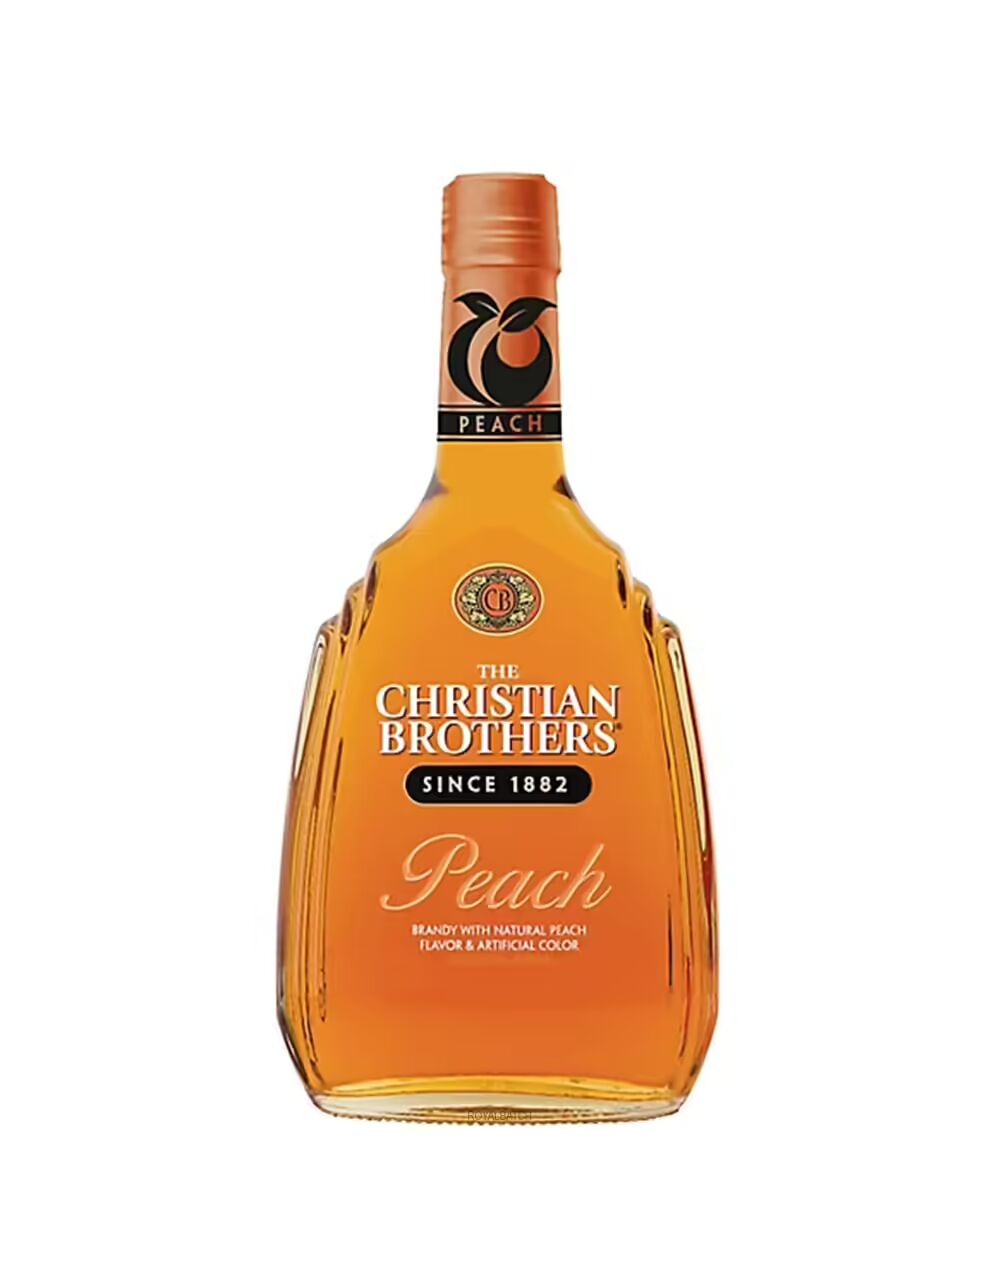 The Christian Brothers Peach Brandy